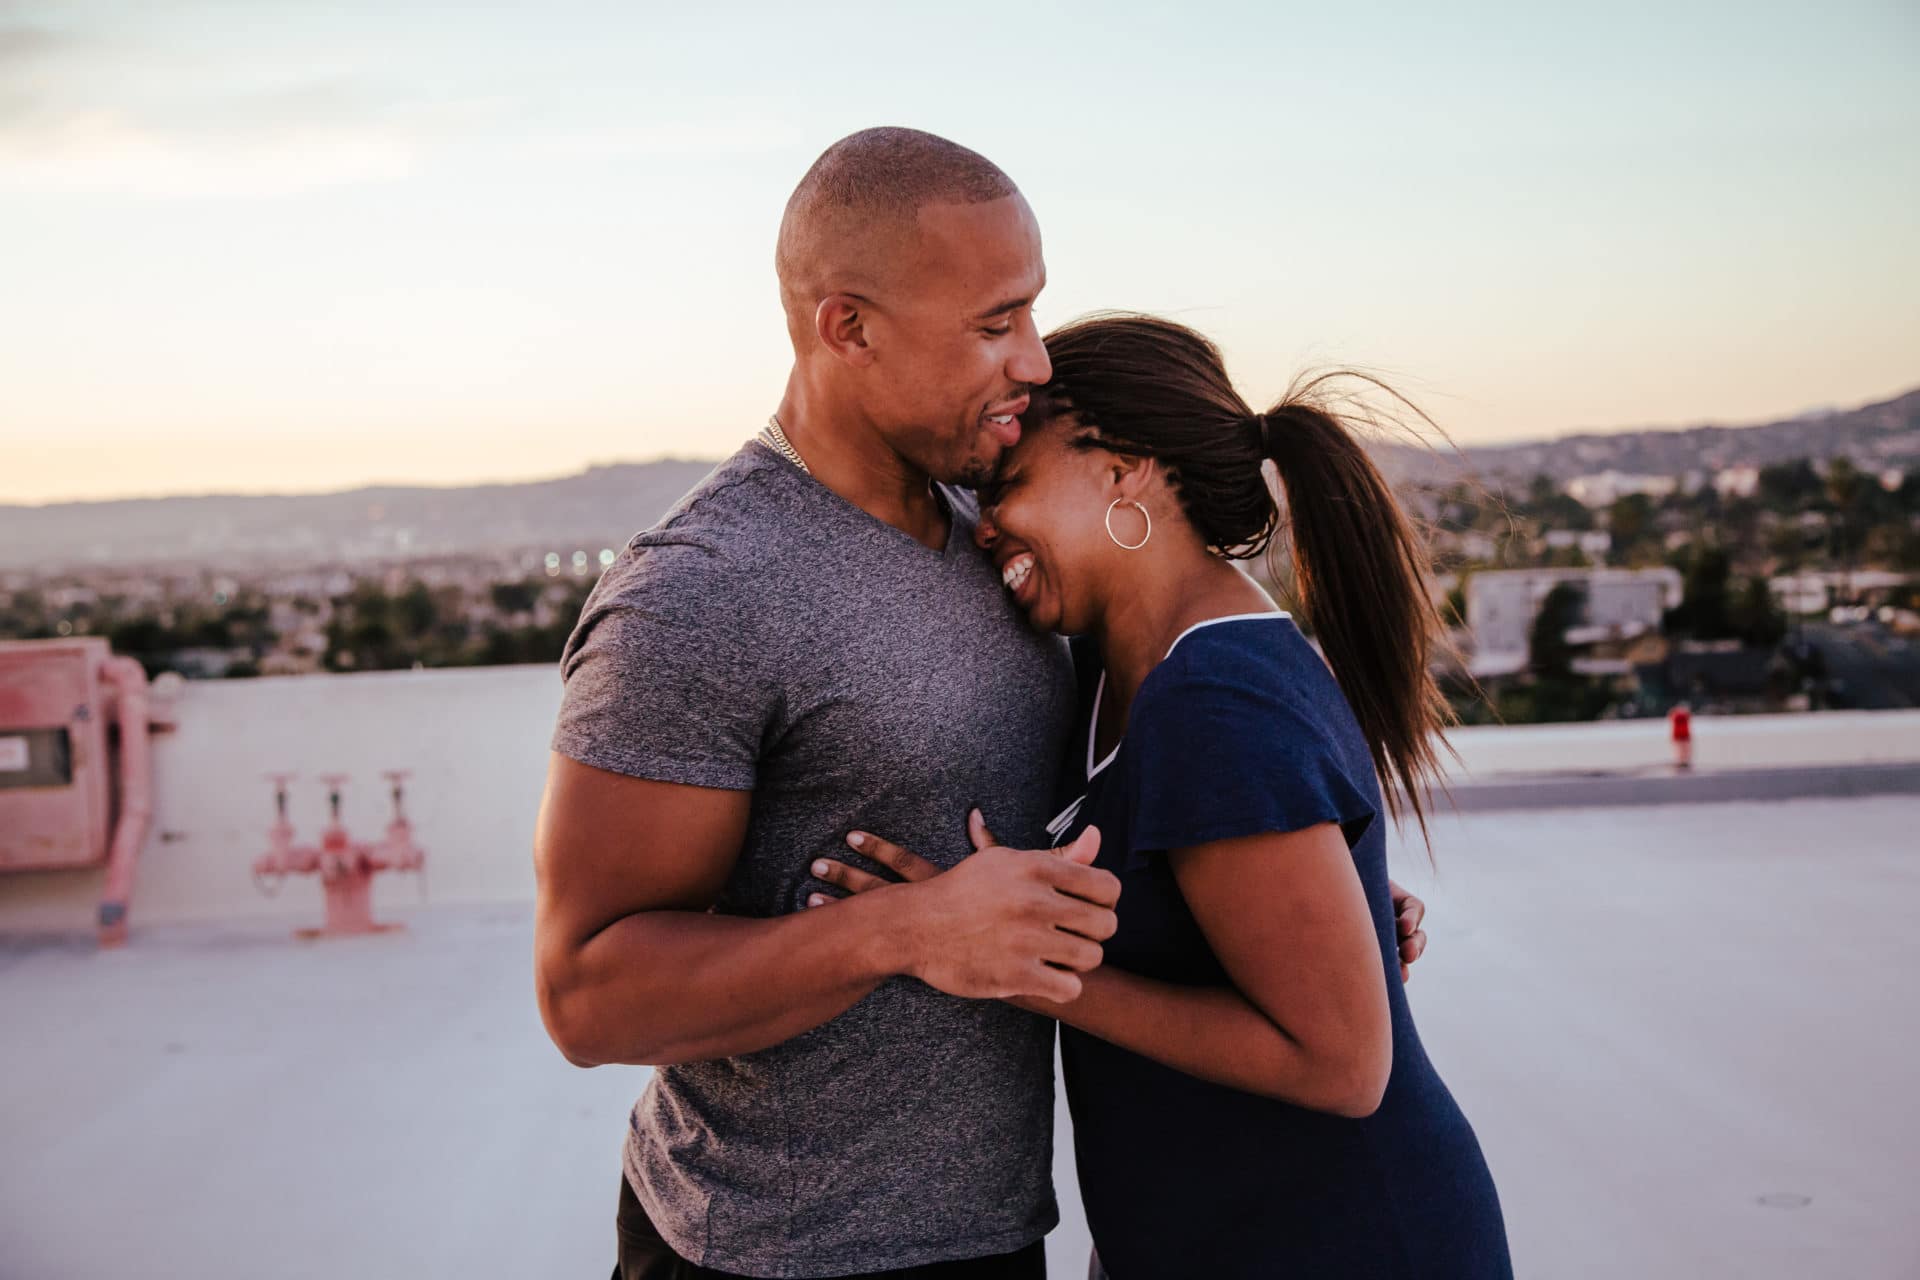 Jemele Hill On Her Surprise Engagement: ‘I Feel Like The Luckiest Woman On Earth’